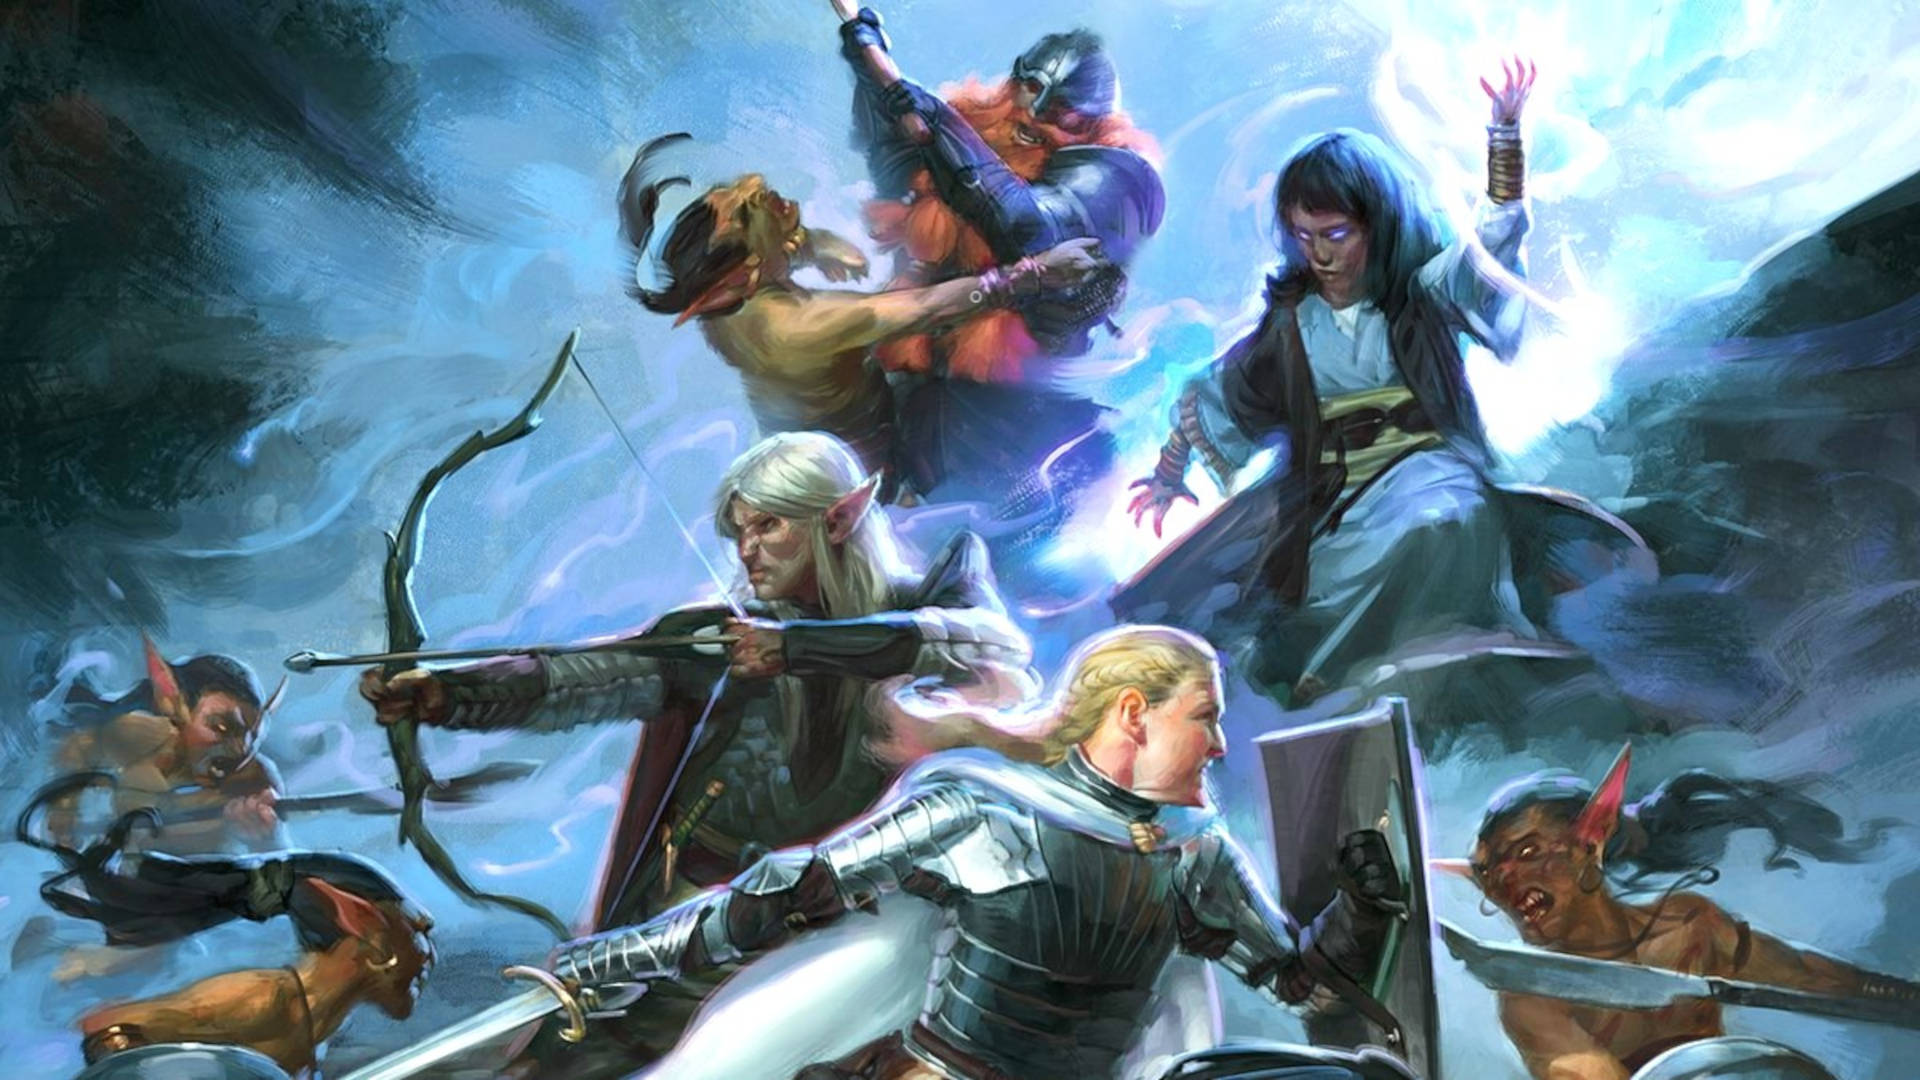 A beginner's guide to DnD. Is DnD a board-game or a video-game